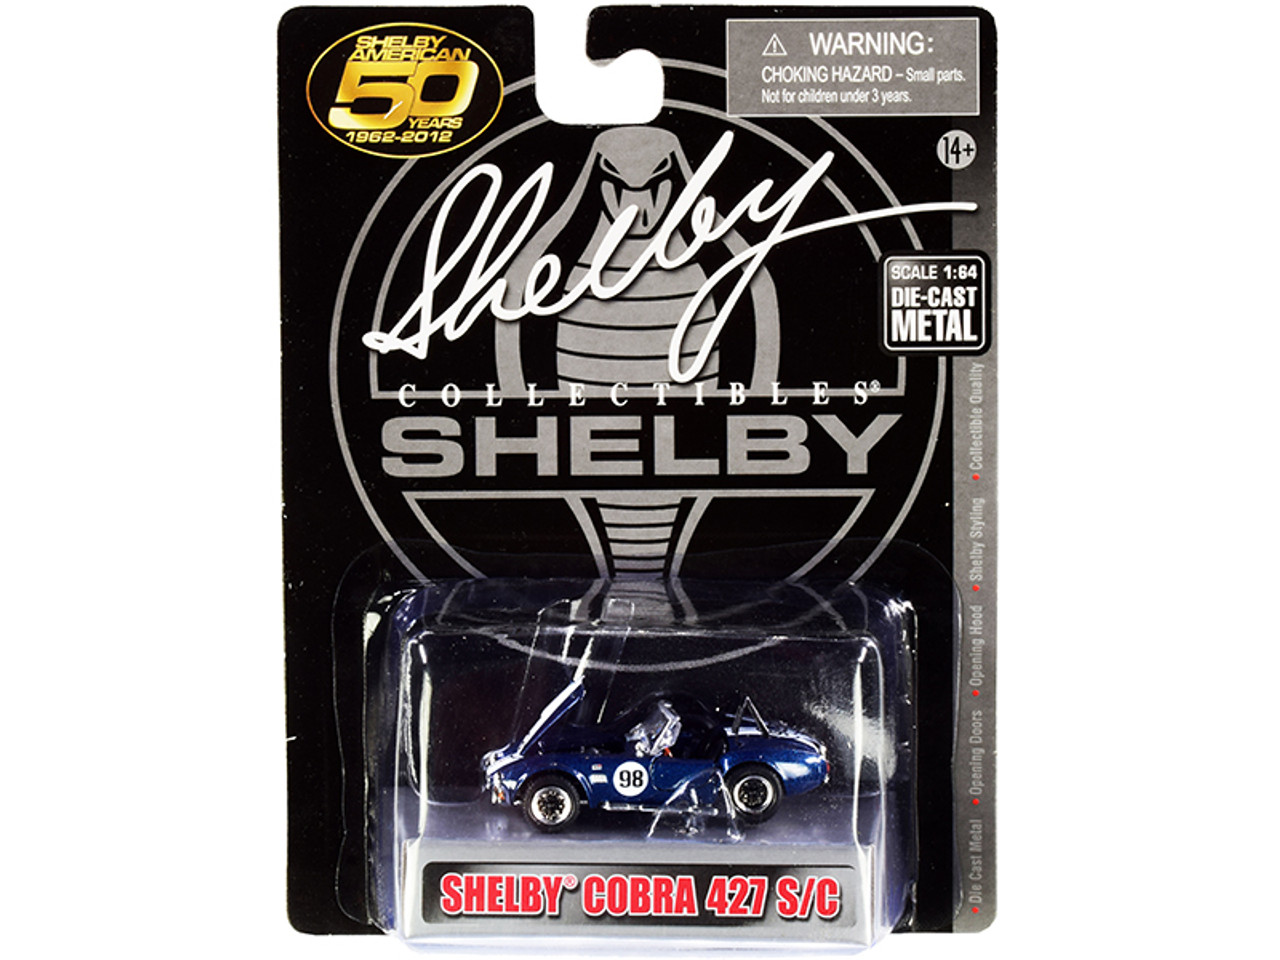 1965 Ford Shelby Cobra 427 S/C #98 Blue Metallic with White Stripes "Shelby American 50 Years" (1962-2012) 1/64 Diecast Model Car by Shelby Collectibles